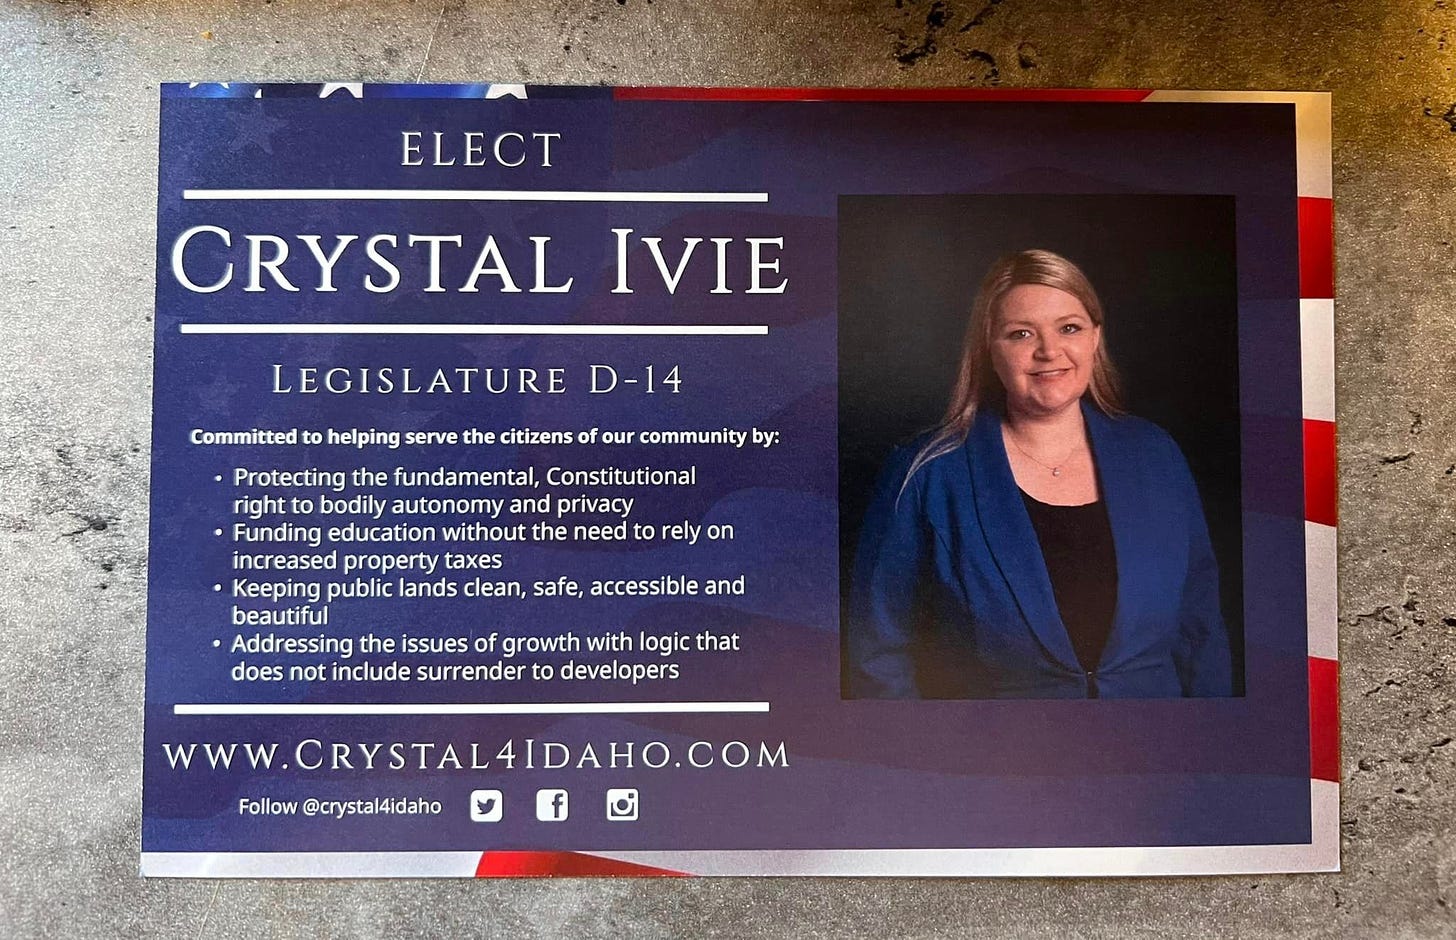 May be an image of 1 person and text that says 'ELECT CRYSTAL IVIE Committed LEGISLATURE D-14 helping serve the citizens of our community by: •Protecting the fundamental, Constitutional right bodily autonomy and privacy Funding education without the need to ely on increased property taxes •Keeping public lands clean, safe, accessible and beautiful Addressing the issues of growth with logic that does not include surrender to developers WWW.CRYSTAL4IDAHO.COM Follow @crystal4idaho'